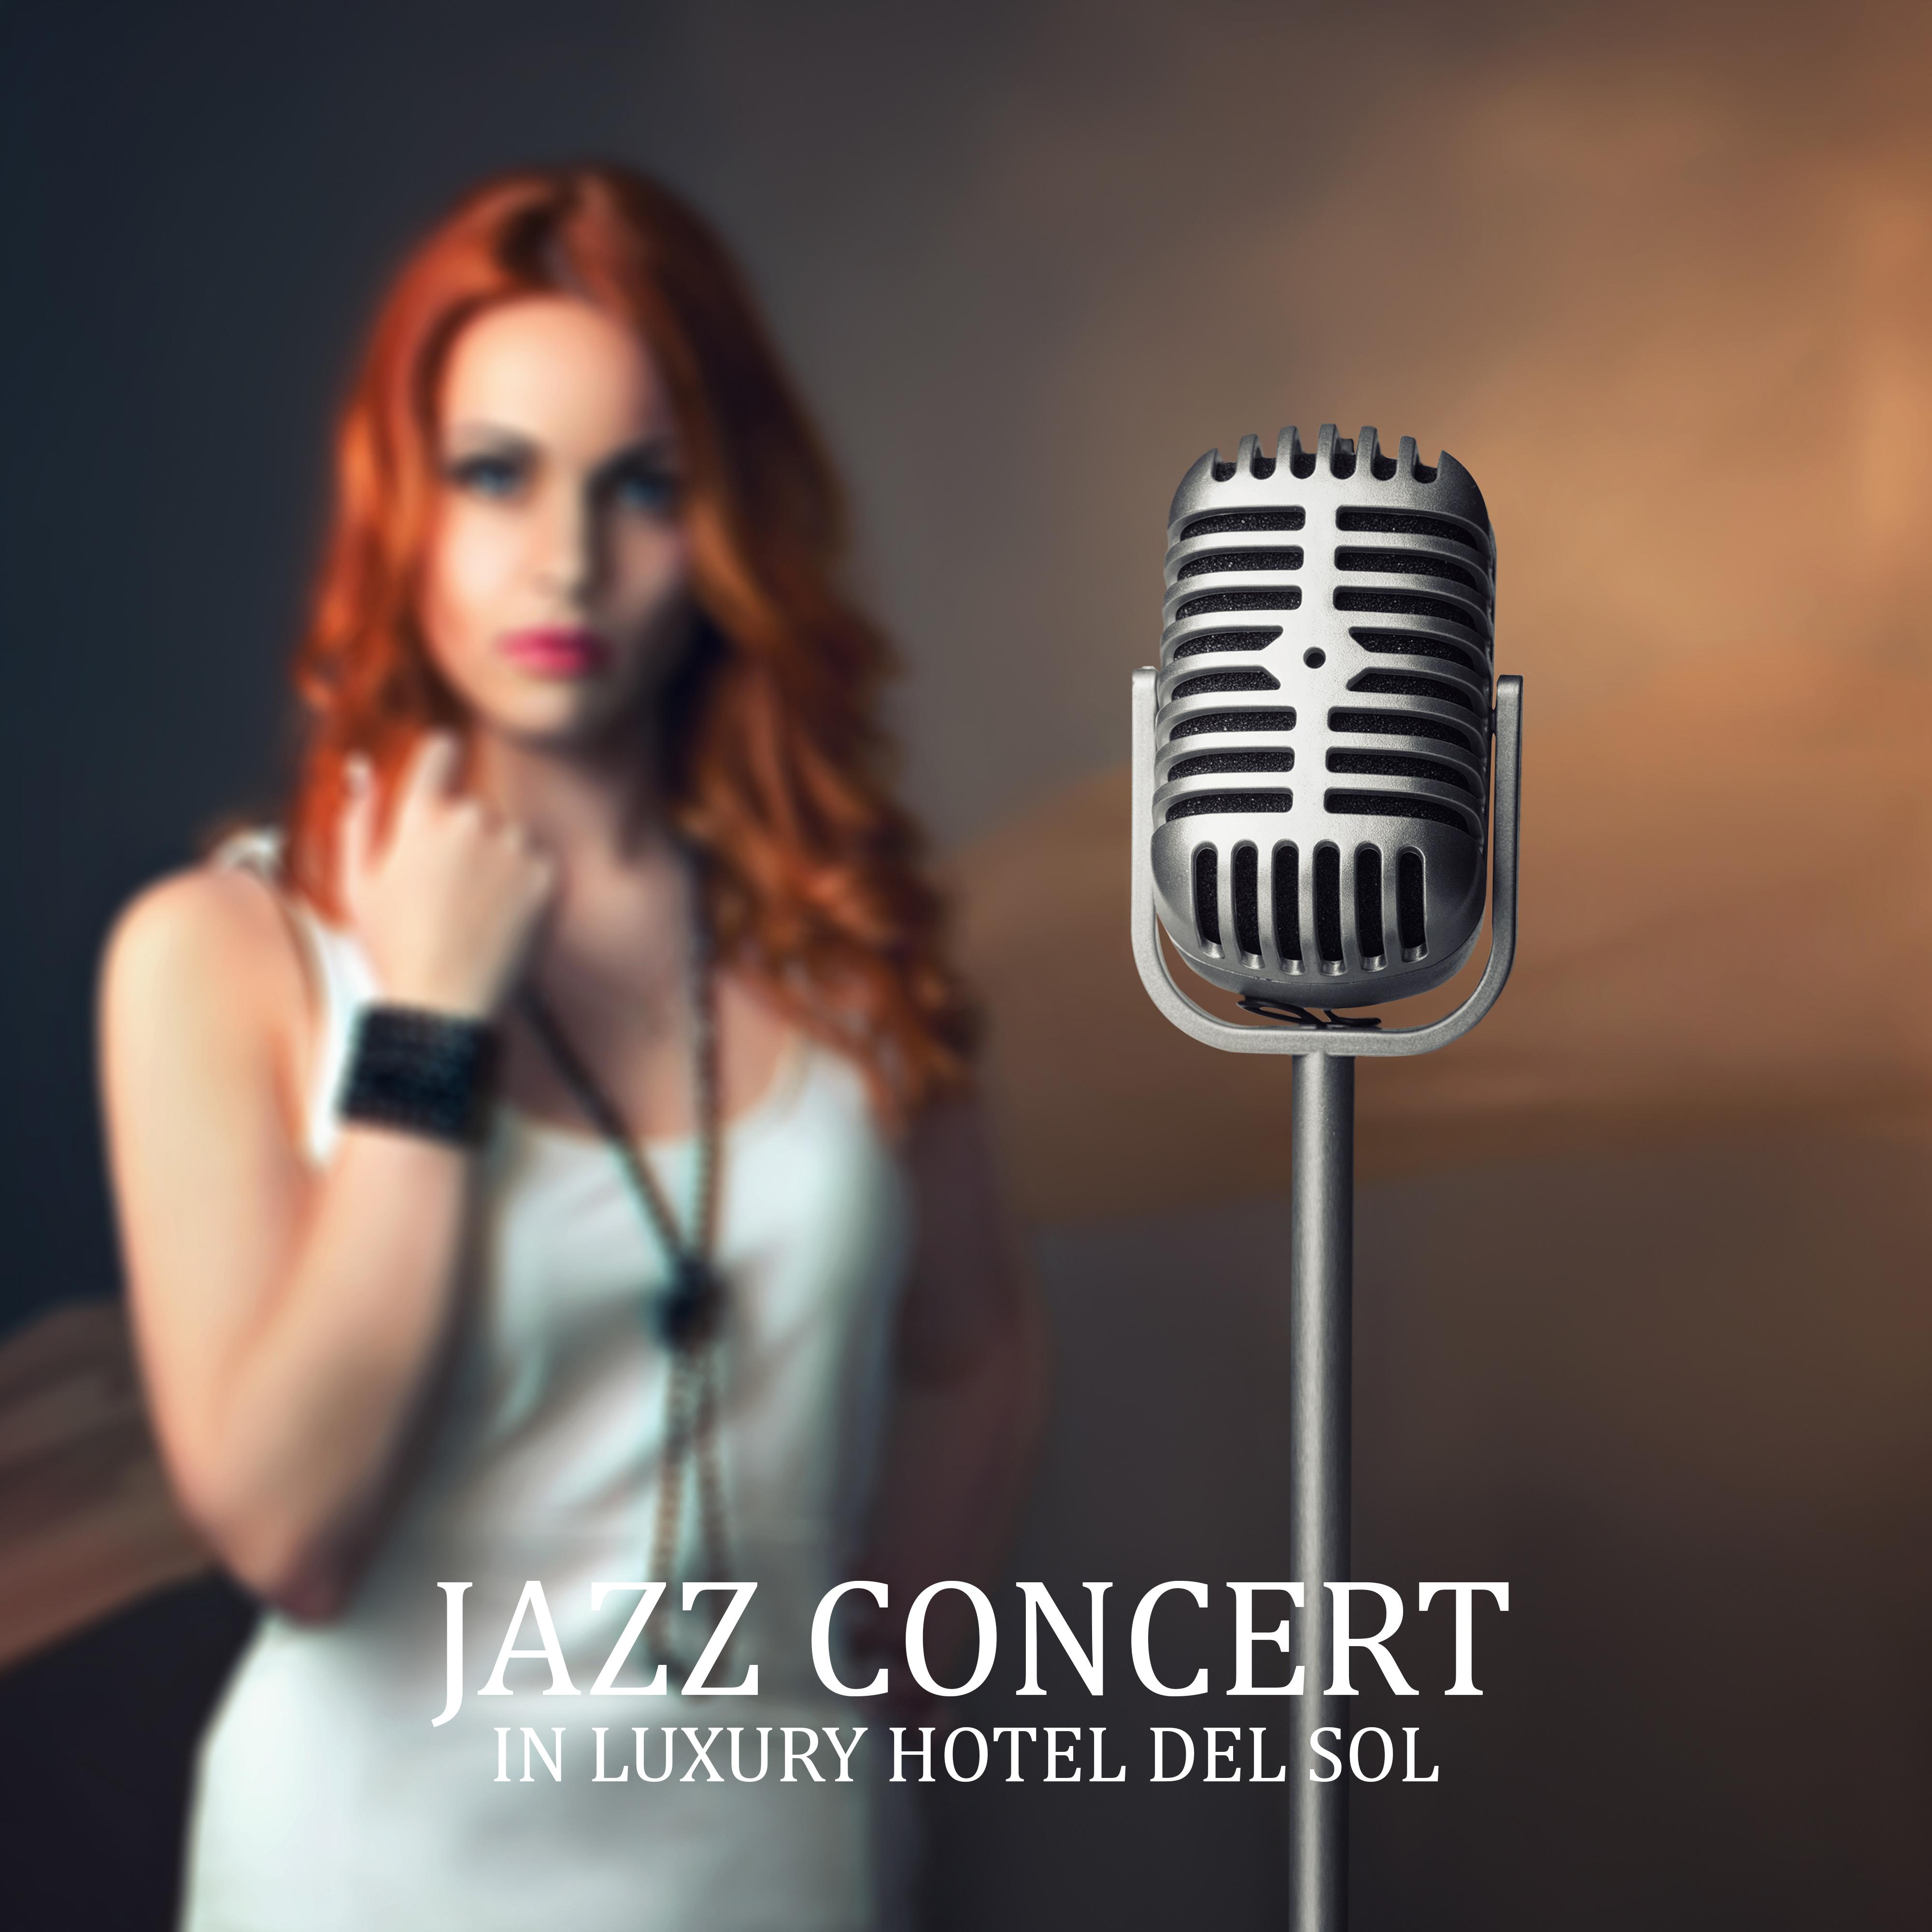 Jazz Concert in Luxury Hotel del Sol: 2019 Instrumental Smooth Jazz Music Compilation for Party, Exclusive Dinner Background, Soft Sounds of Piano & Trumpet